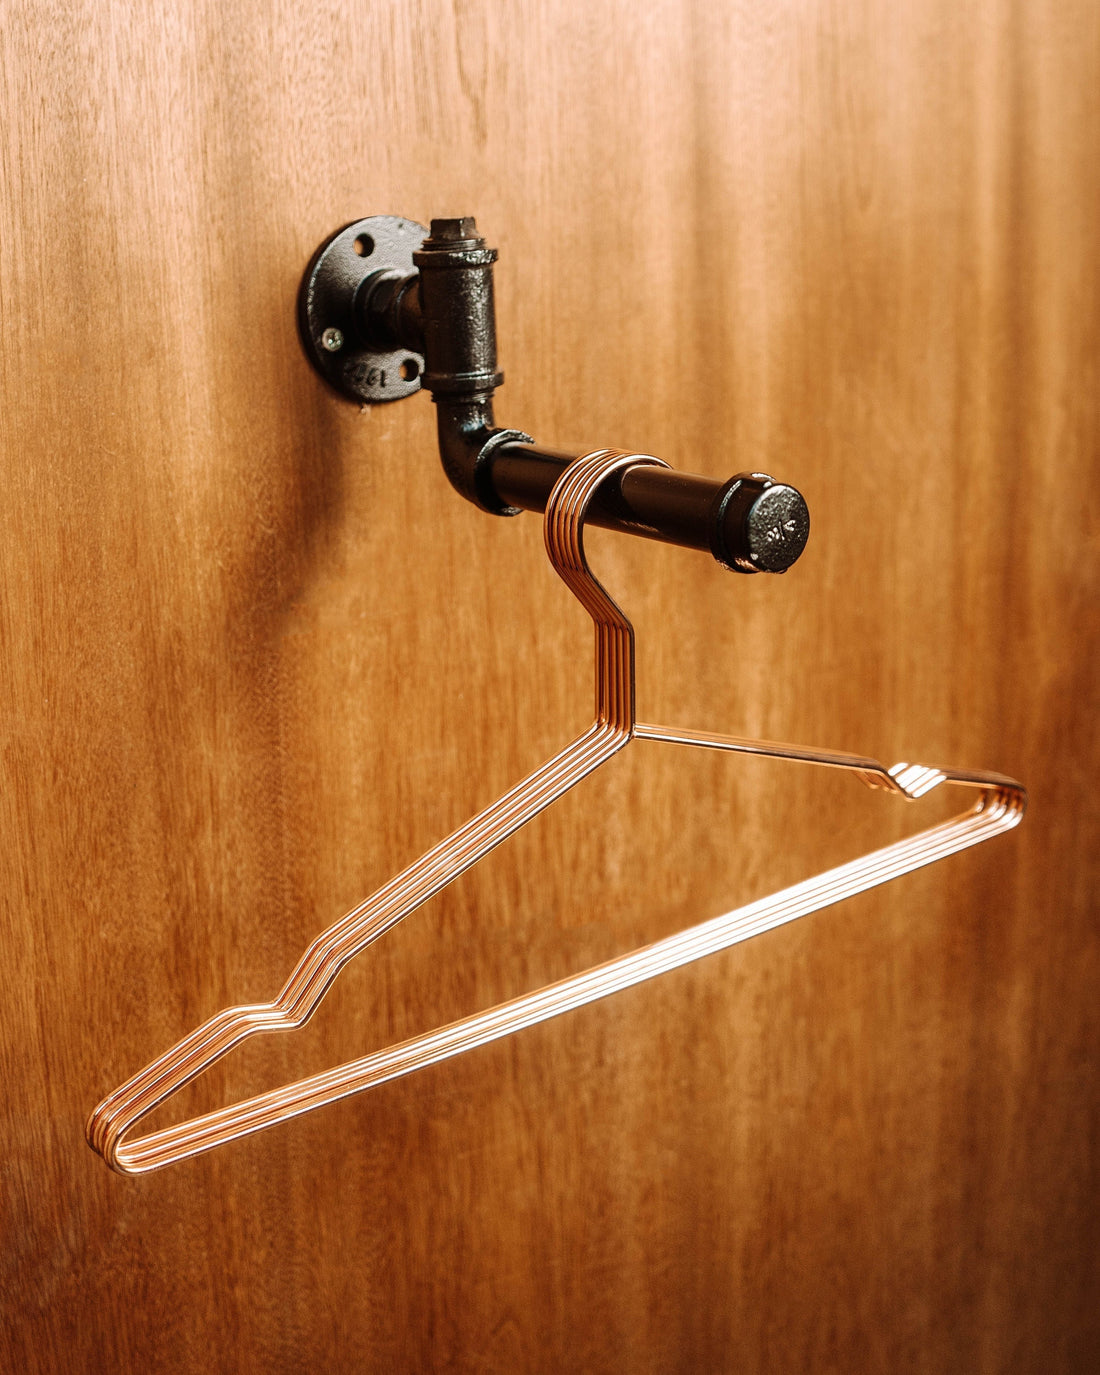 A modern Clothes Rail Wall Mount with hanging garments, offering a space-efficient and stylish way to organize clothing.